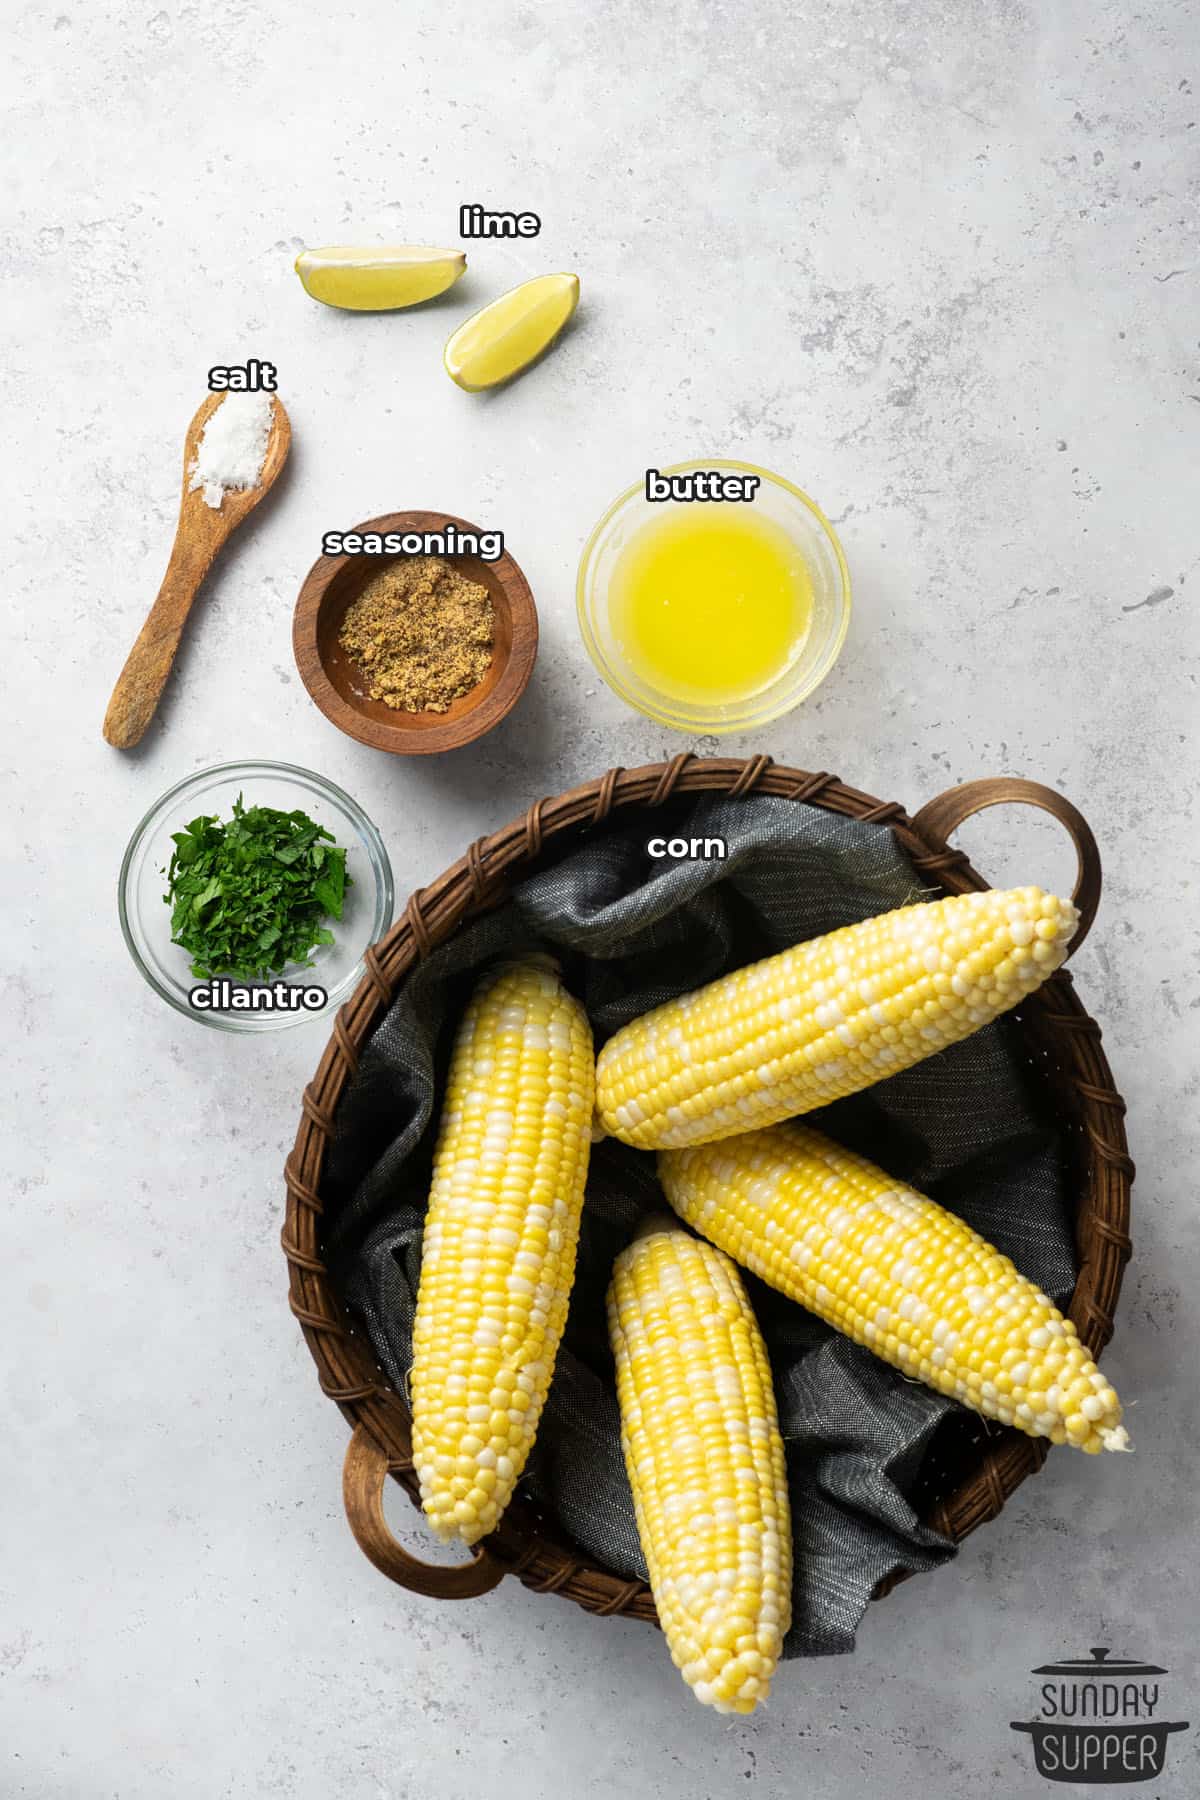 all the ingredients for air fried corn with labels